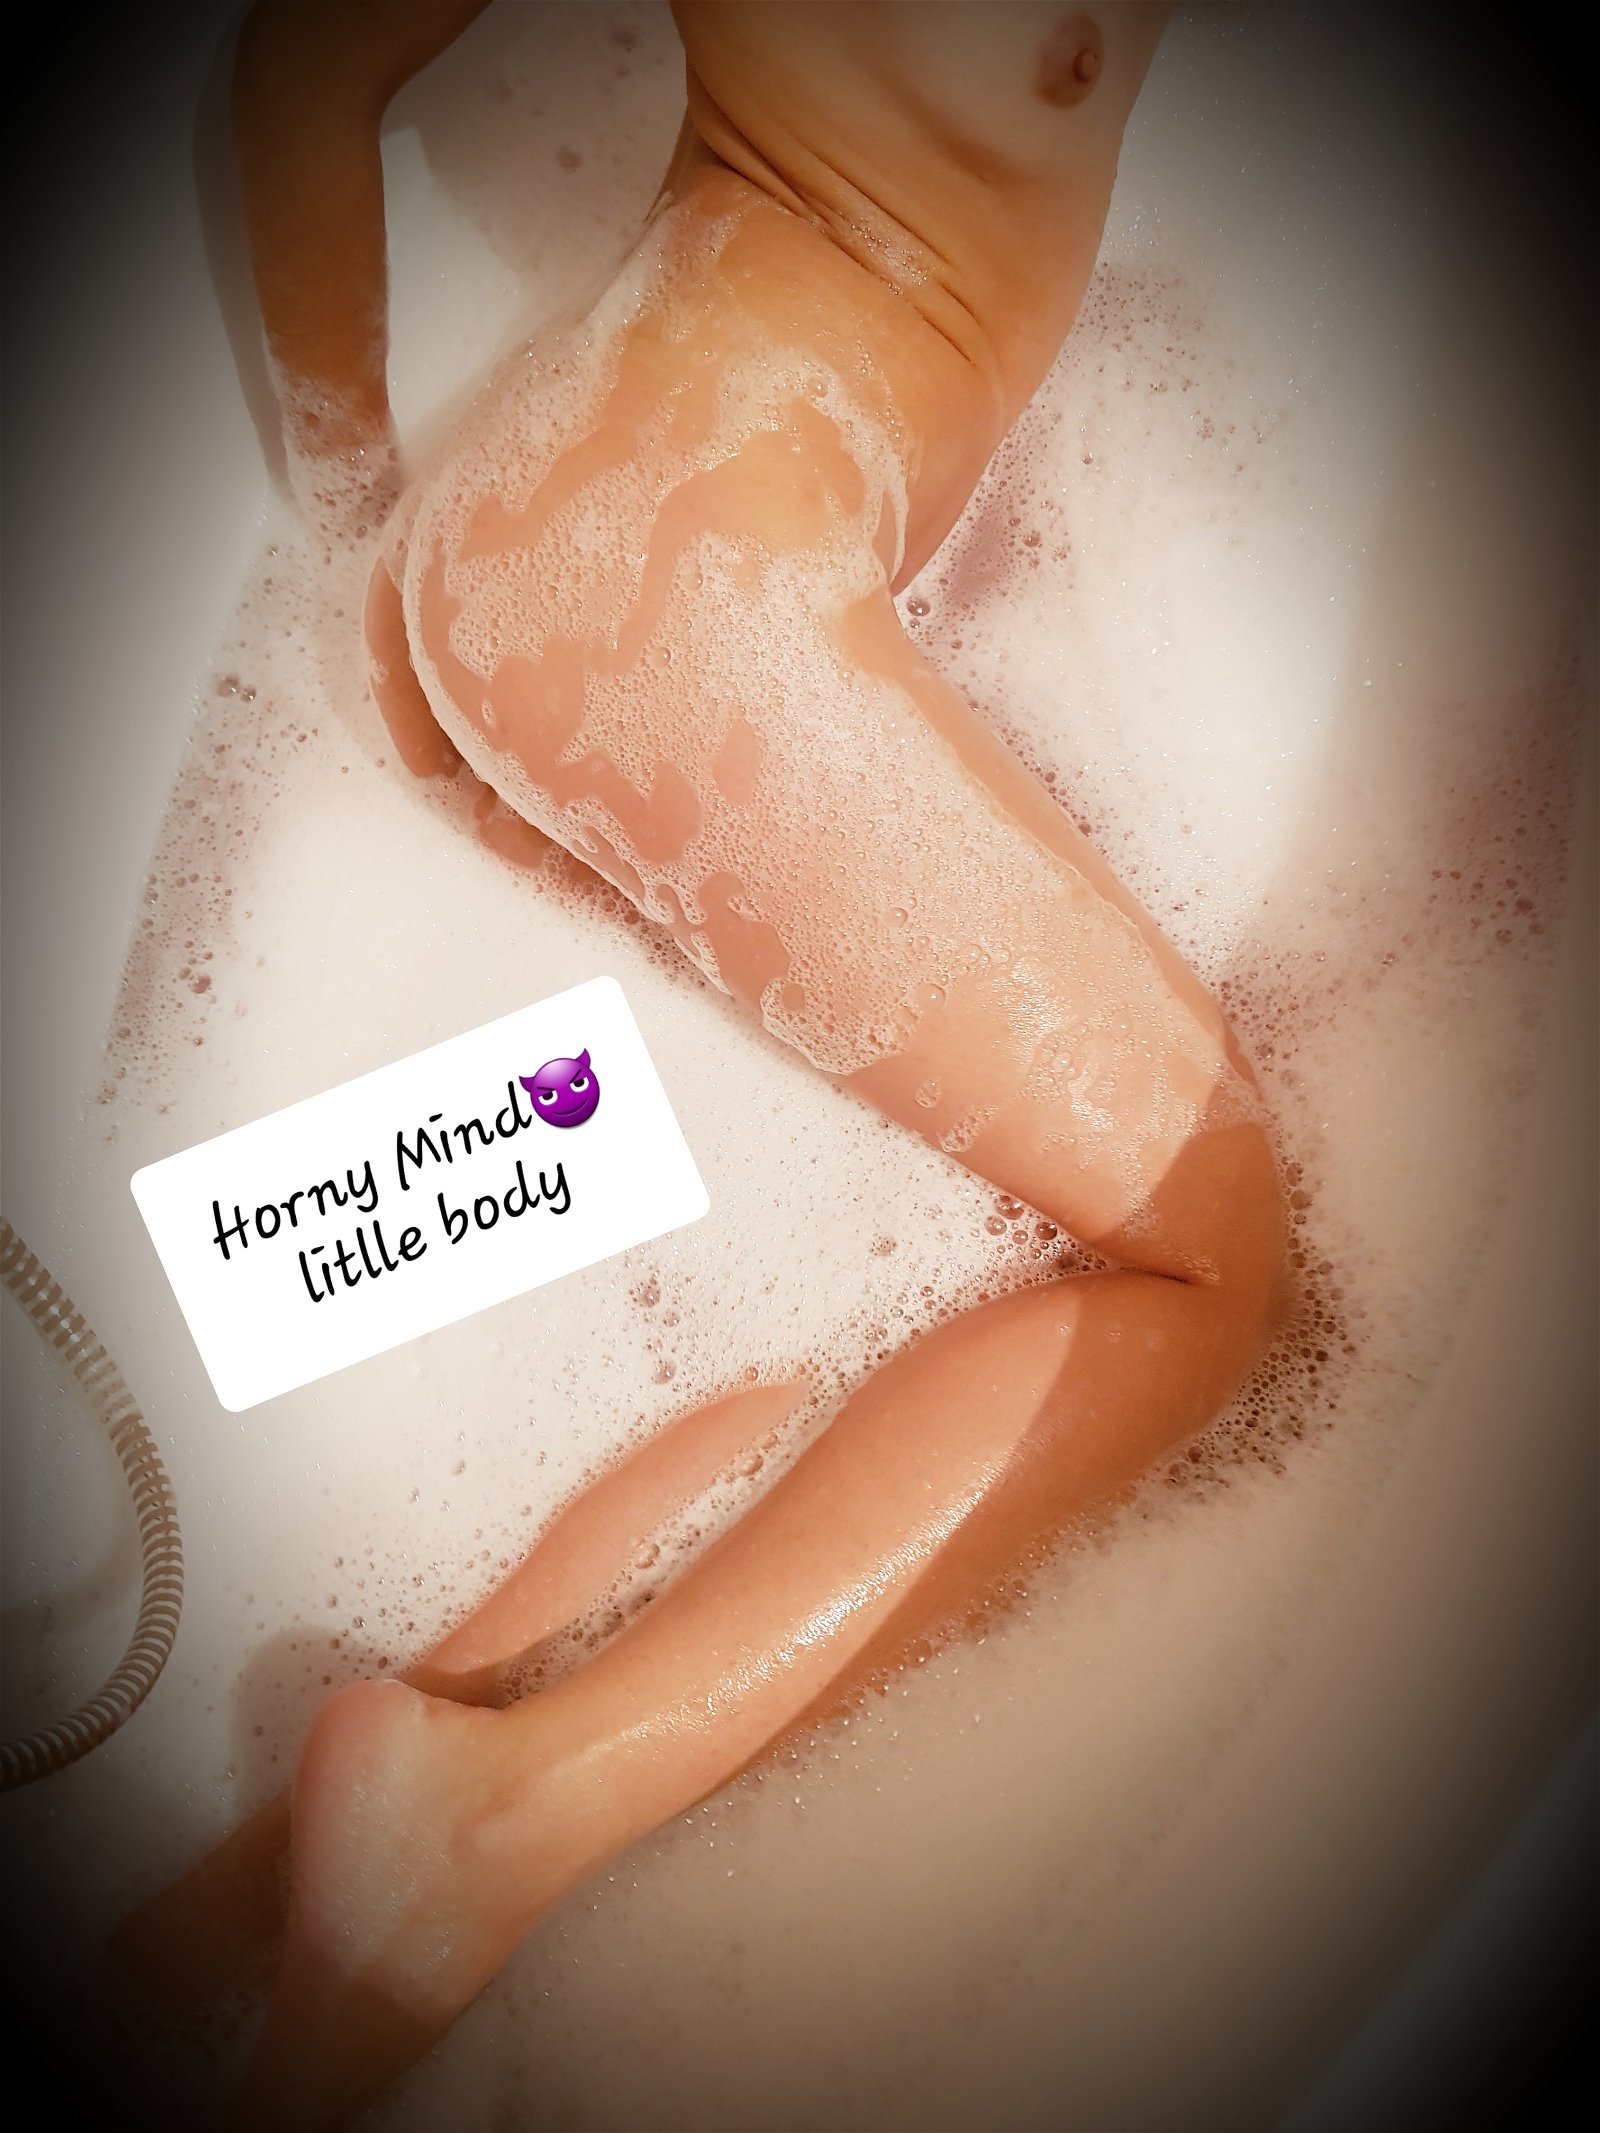 Watch the Photo by CandieCross with the username @CandieCross, who is a star user, posted on December 12, 2018 and the text says 'MORNING ! Share your love❤❤❤ #iwantdick #fuckyou #tinnymeansHOT'